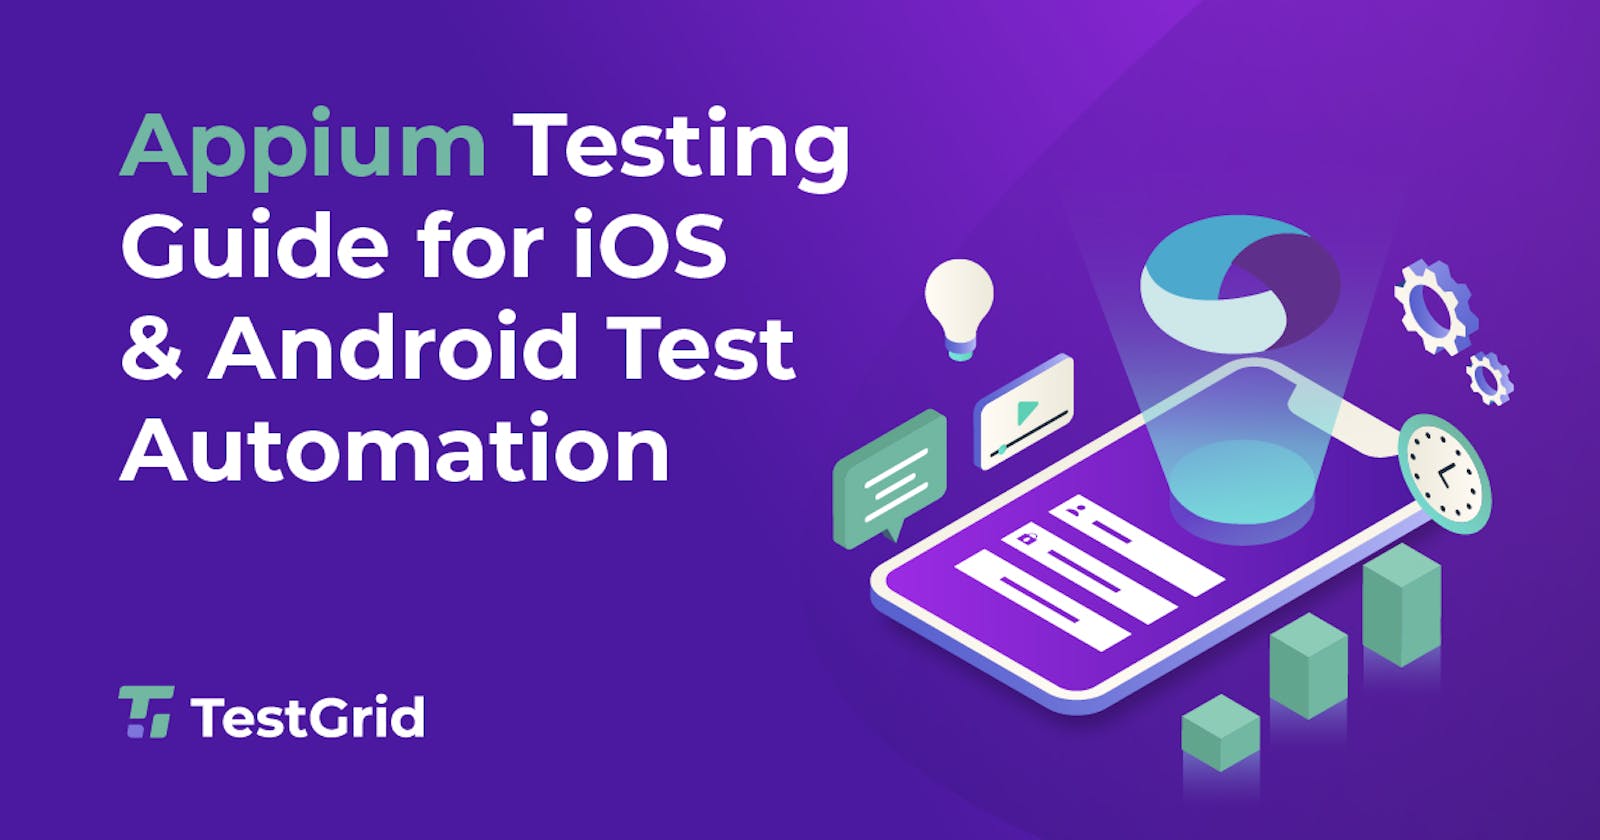 Appium Testing Guide for iOS & Android Test Automation